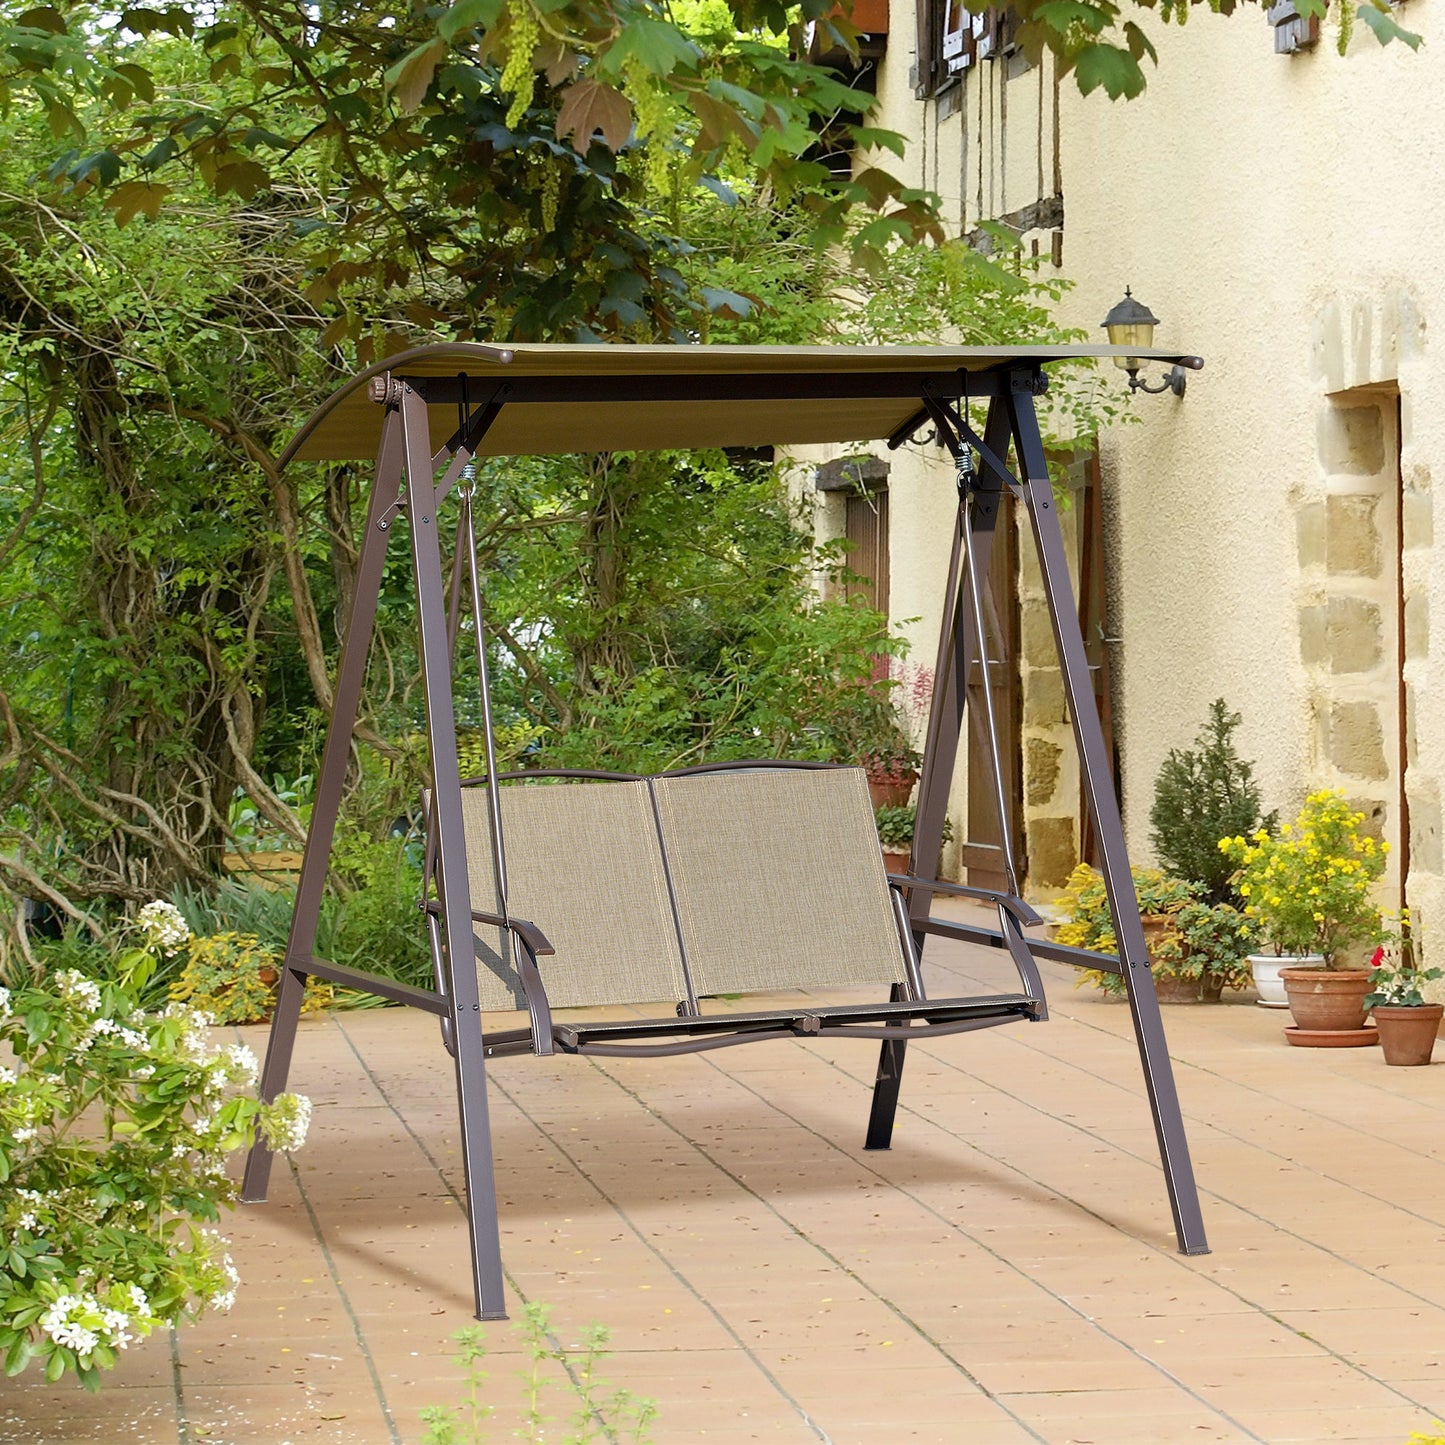 Outsunny 2 Seater Garden Swing Chair, Outdoor Canopy Swing Bench with Adjustable Shade and Metal Frame, Brown